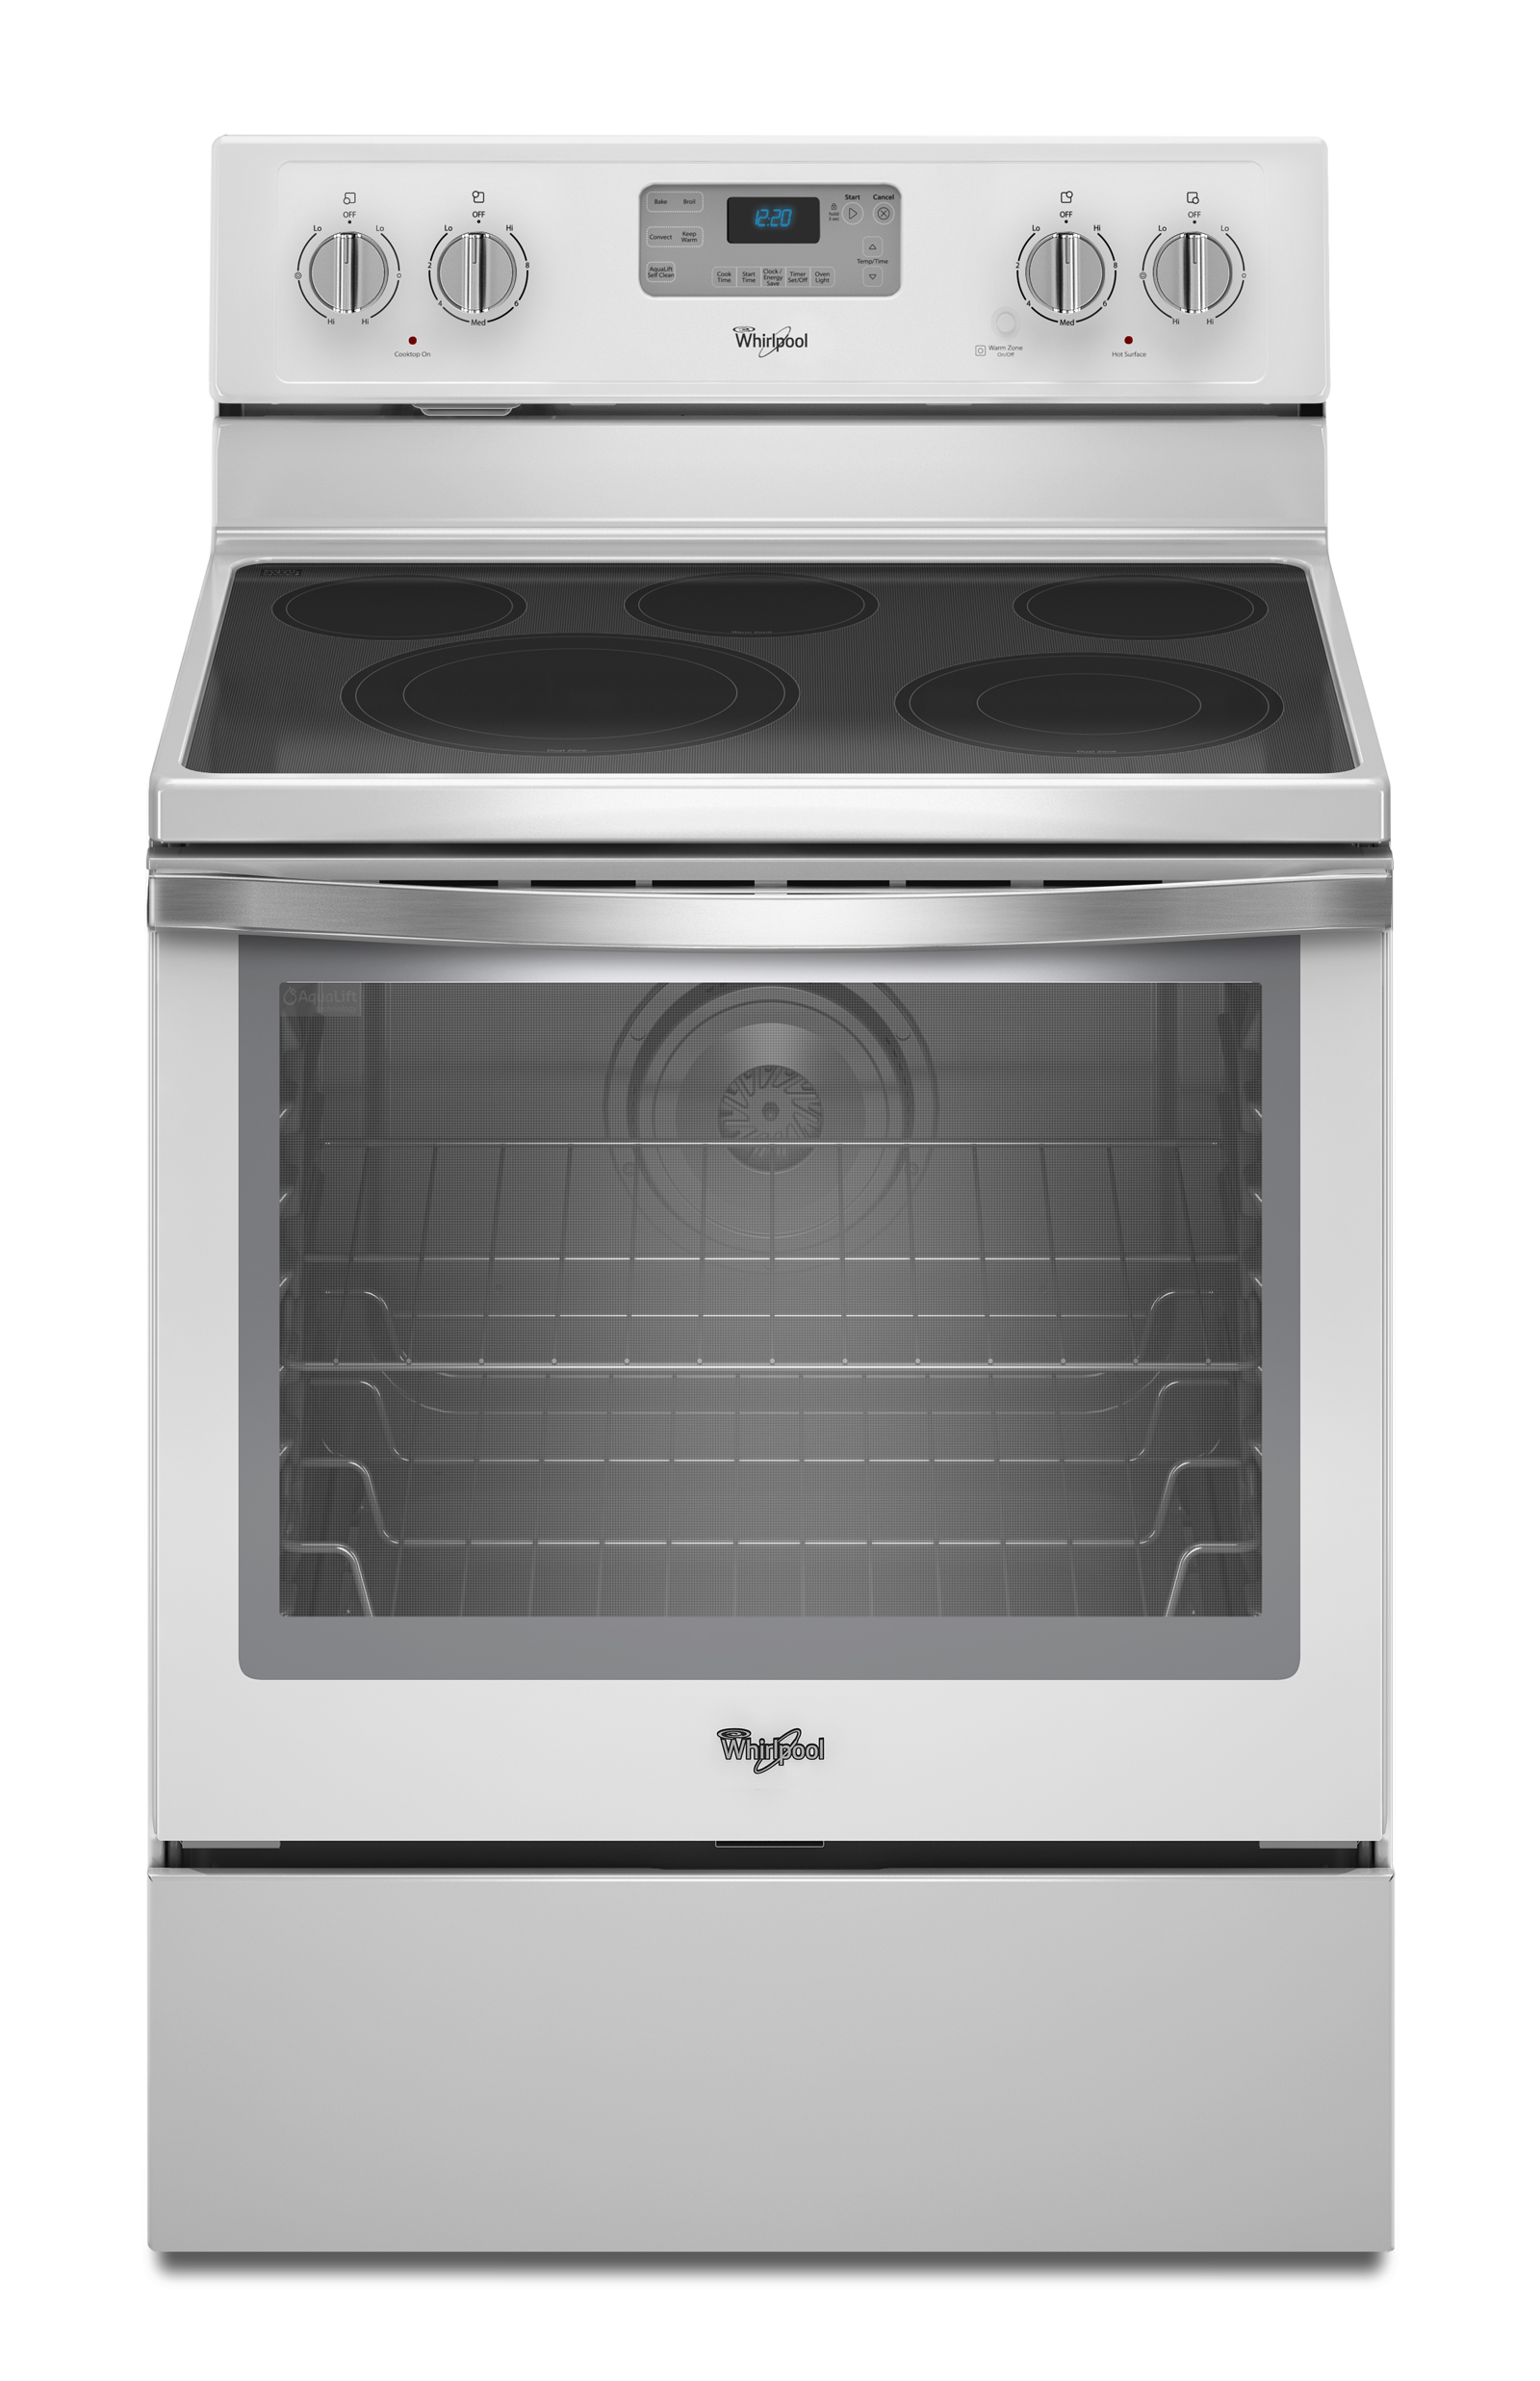 Whirlpool WFE540H0EH 6 4 Cu Ft Freestanding Electric Range White